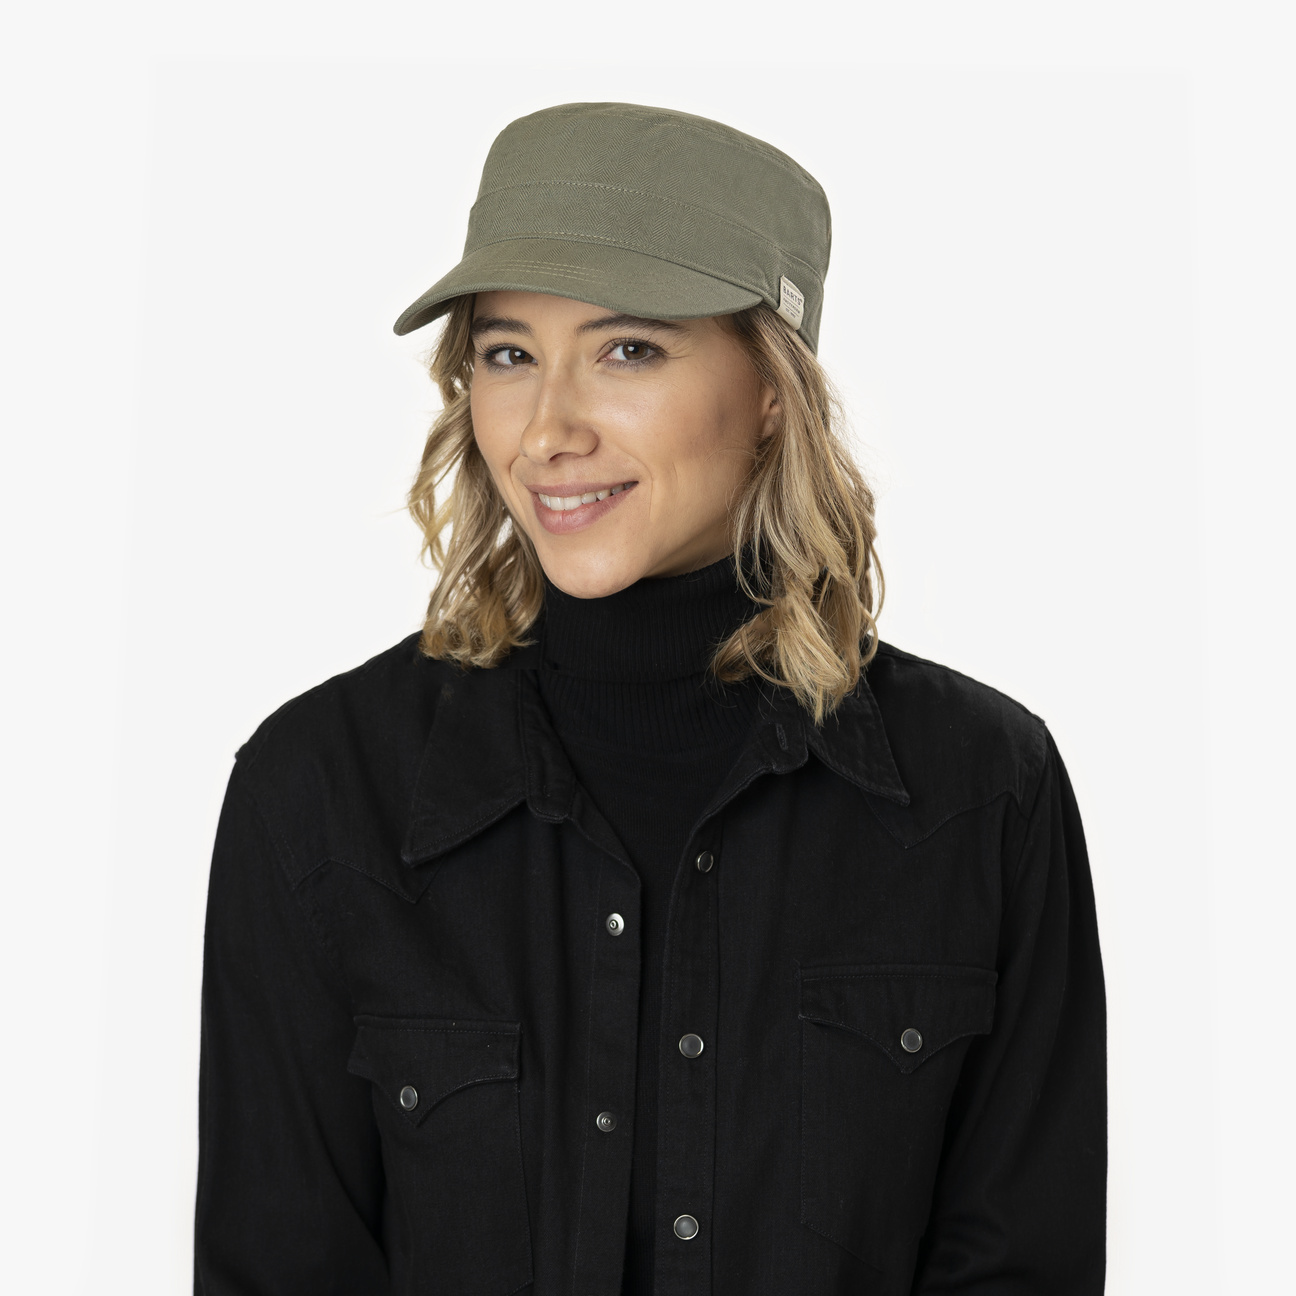 Montania Army Cap by - Barts kr 389,00